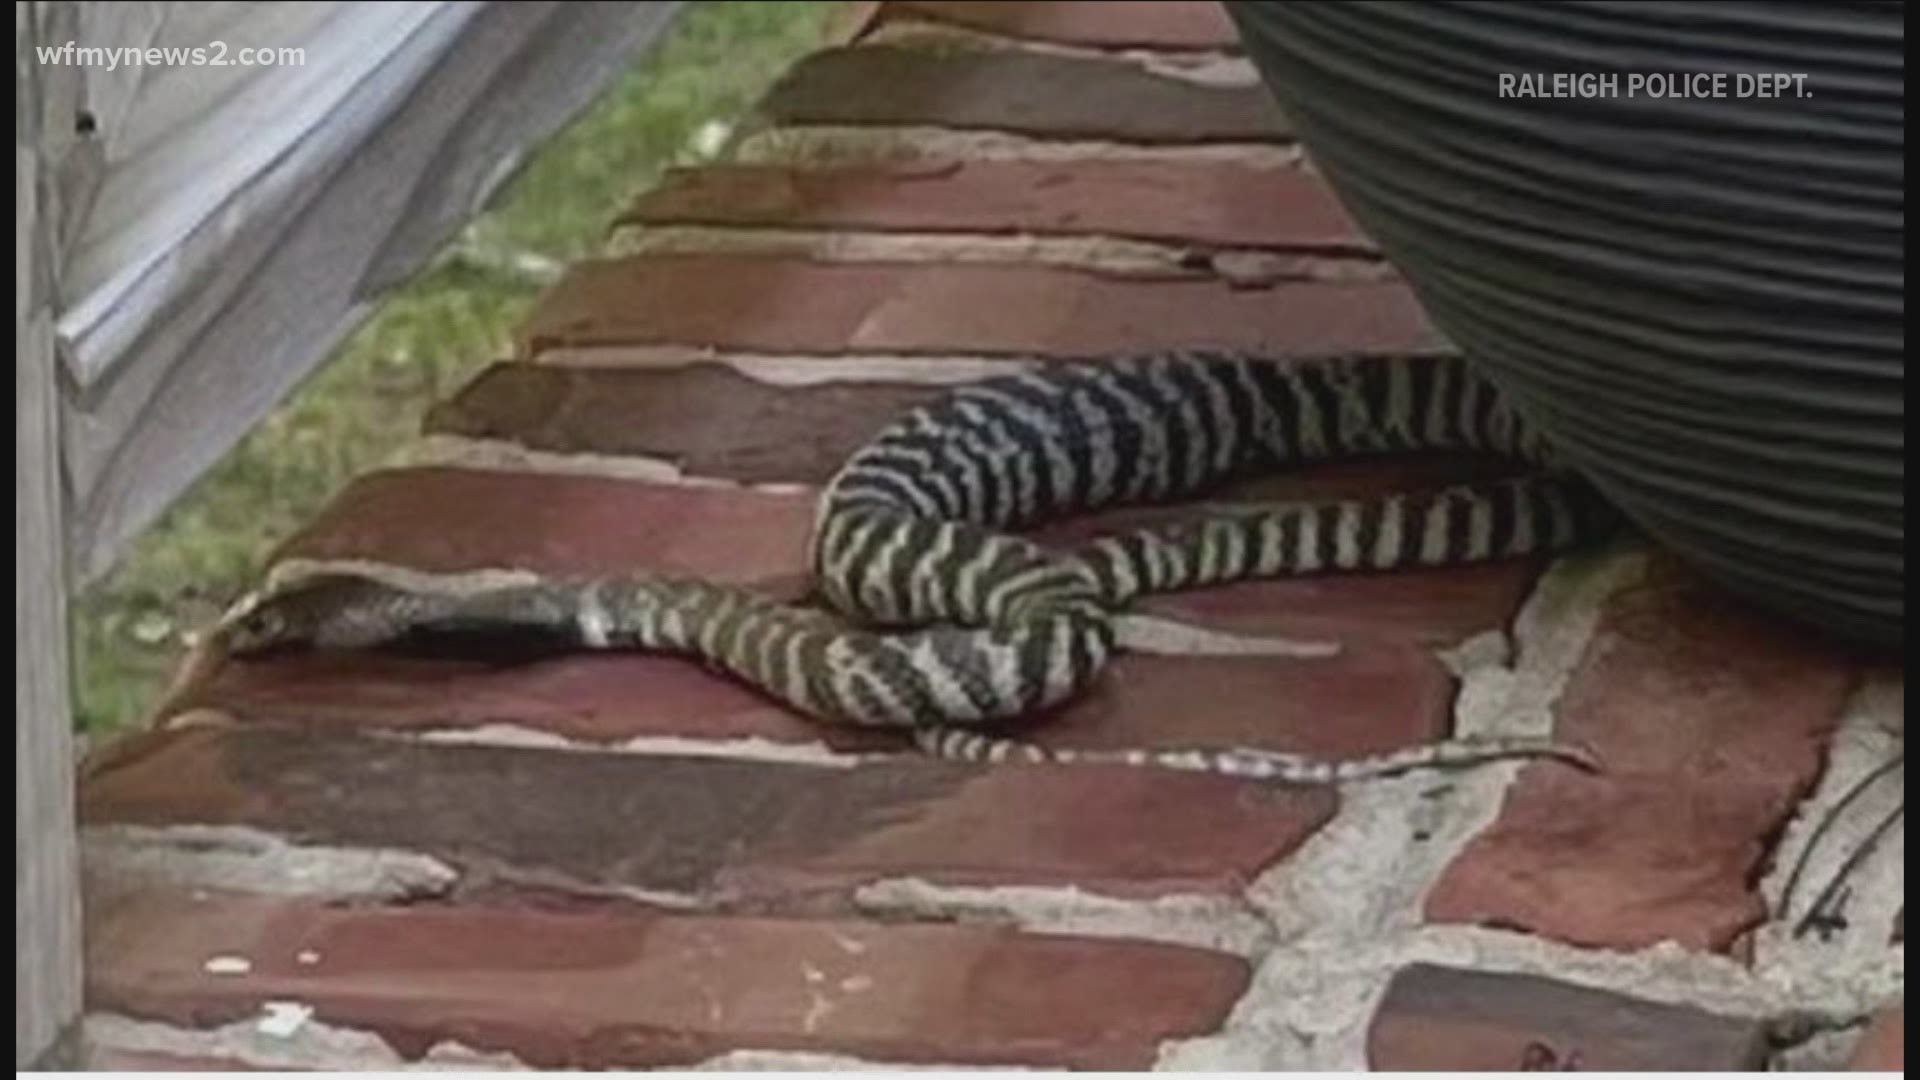 It's called a zebra cobra, and it's a venomous snake that's missing in a Raleigh neighborhood. The serpent doesn't just bite - it spits venom!